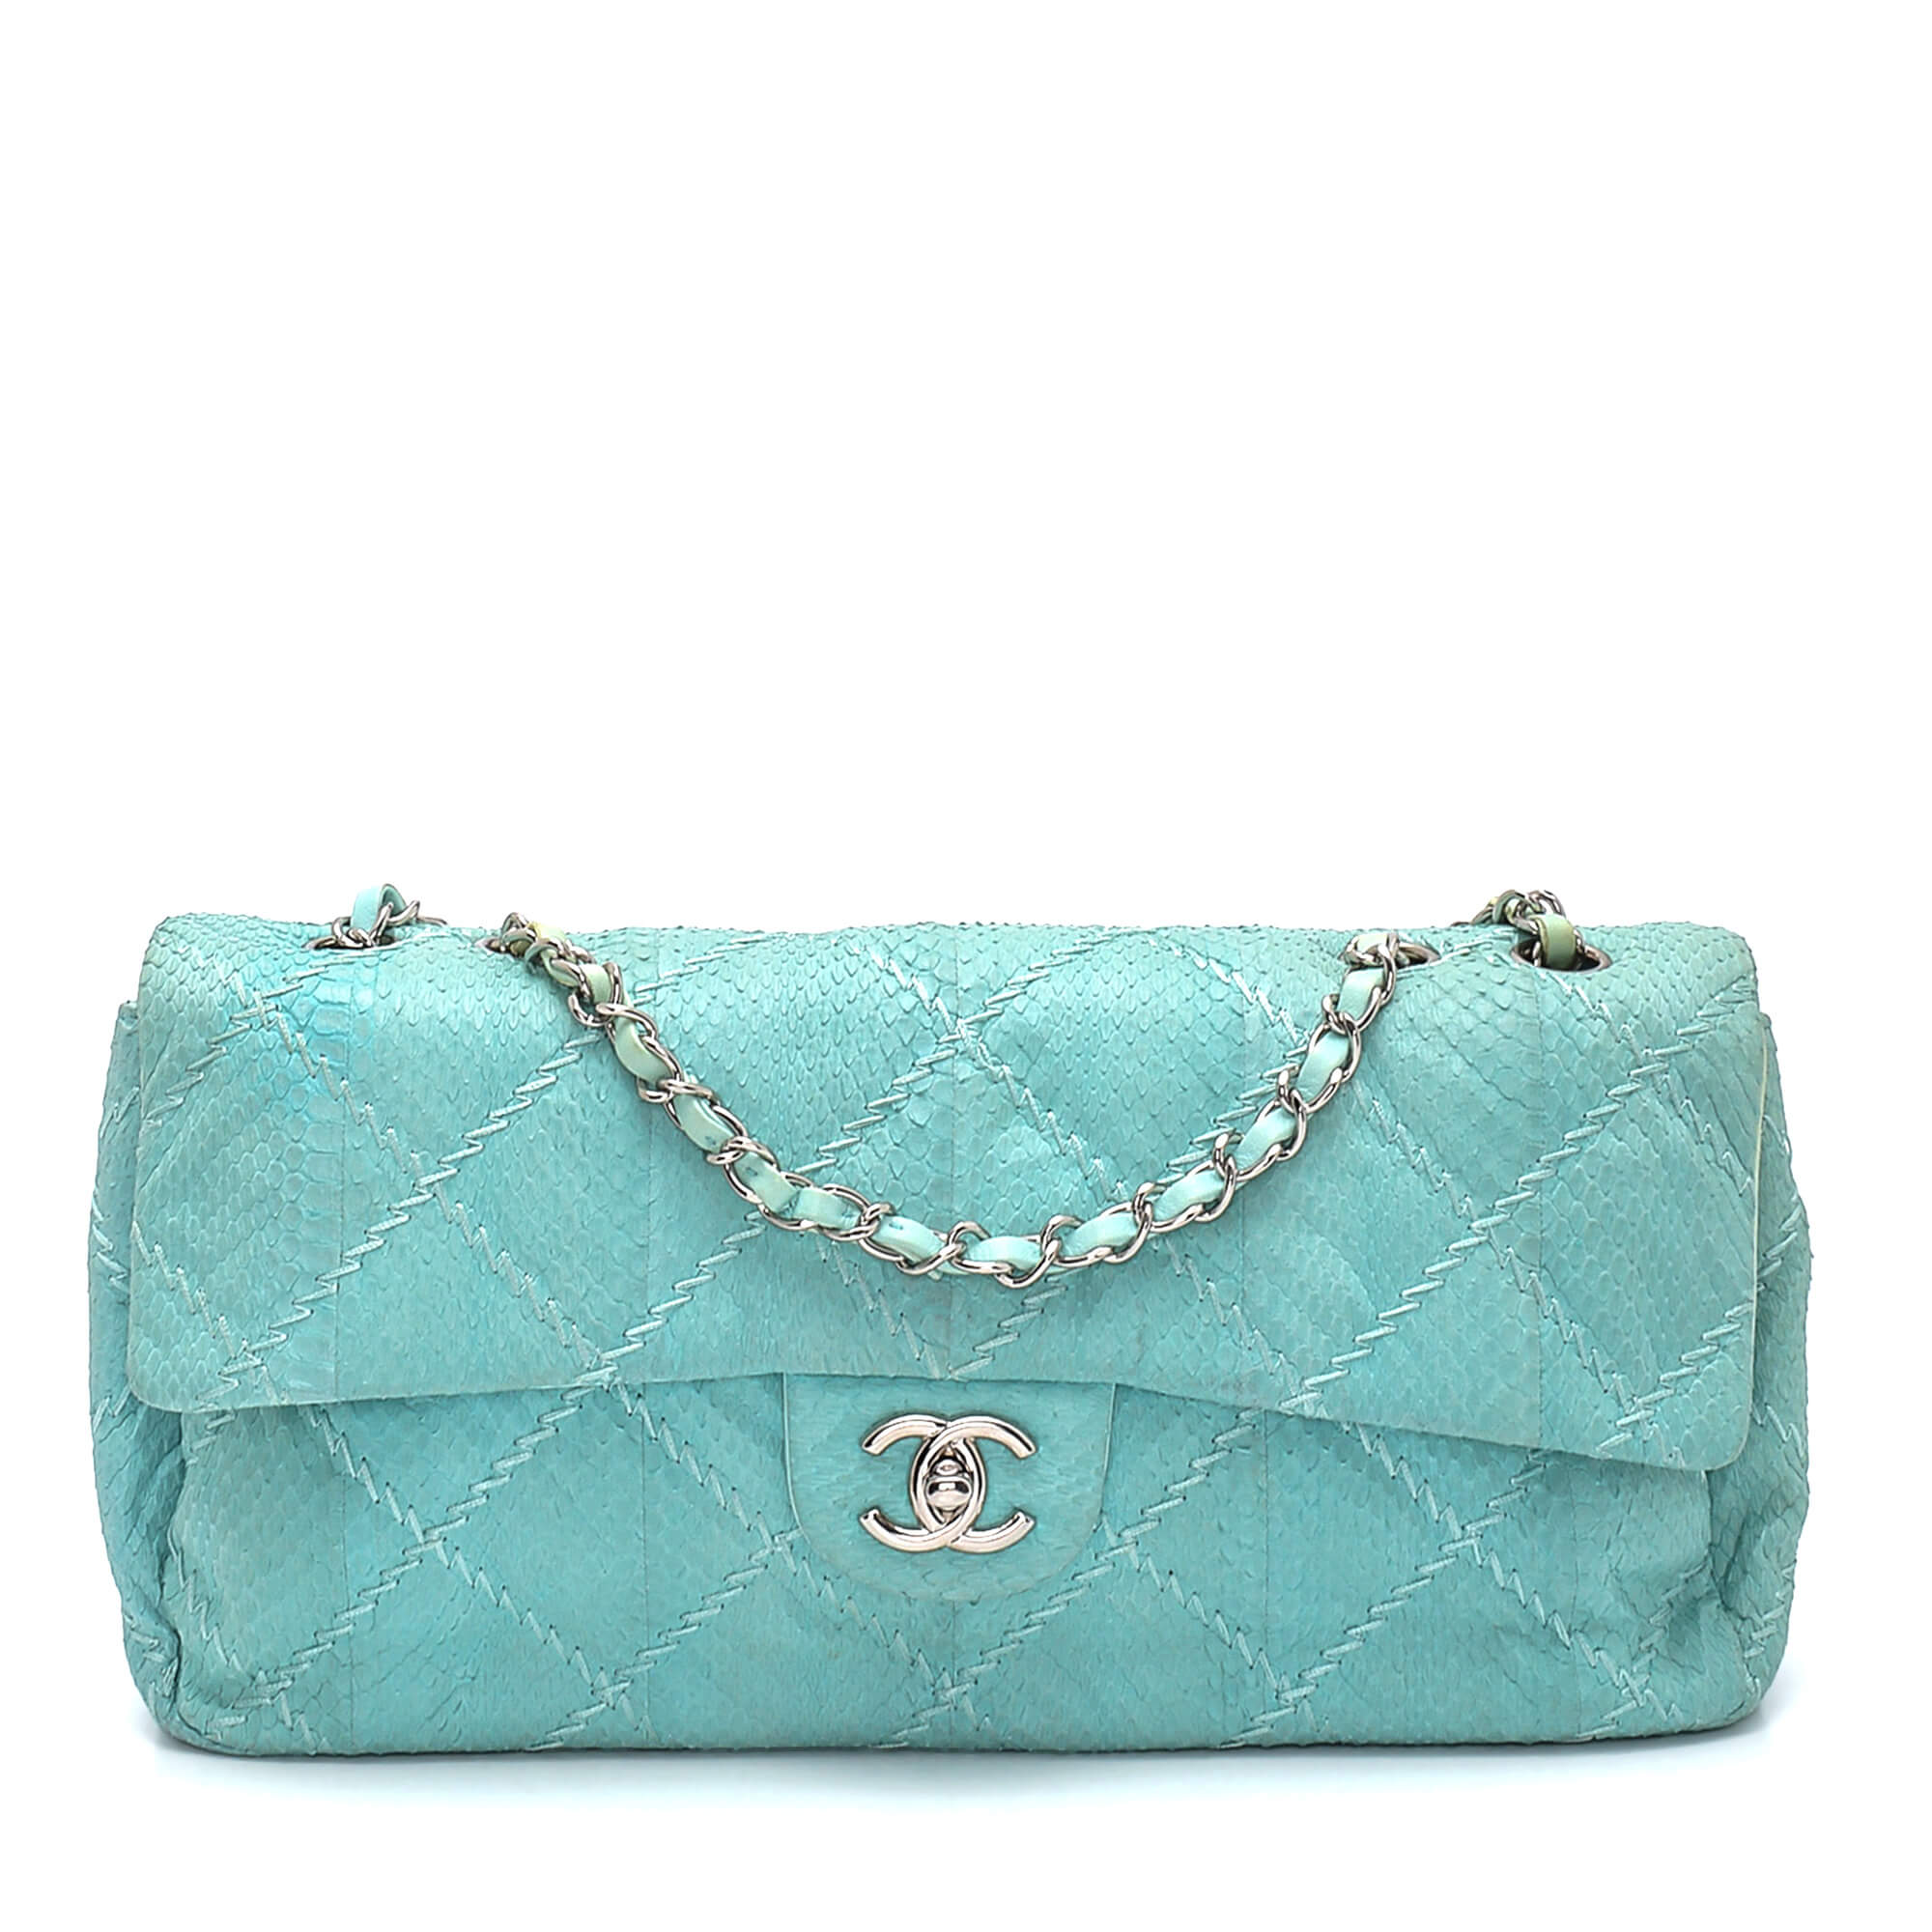 Chanel - Nile Green Python Leather East West Classic Flap Bag 